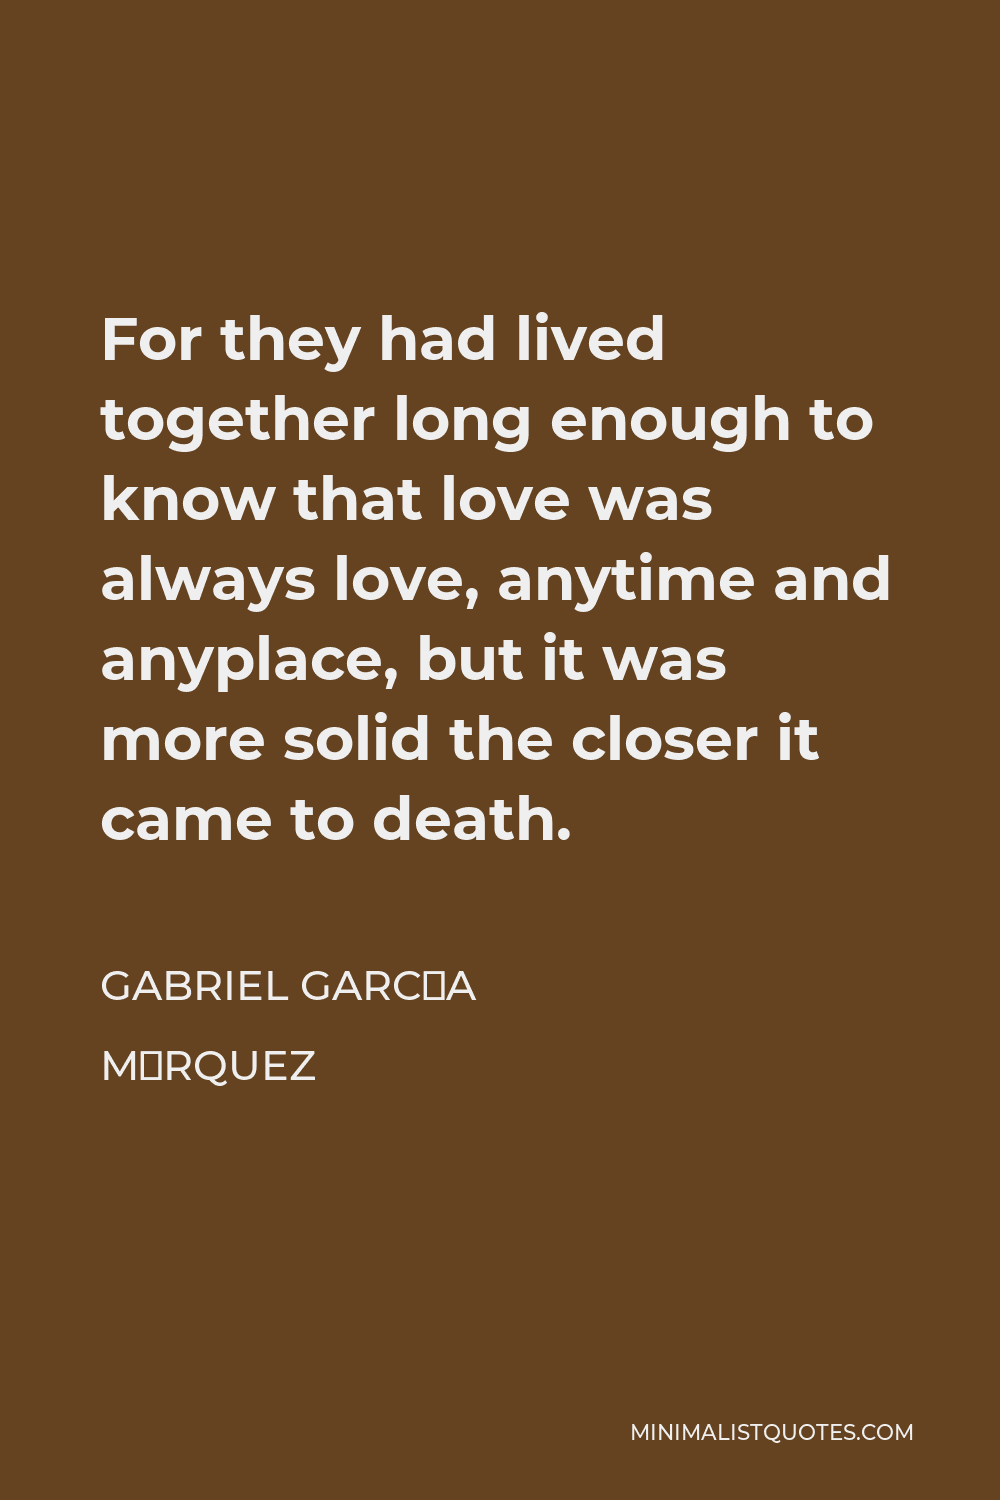 Gabriel García Márquez Quote - For they had lived together long enough to know that love was always love, anytime and anyplace, but it was more solid the closer it came to death.